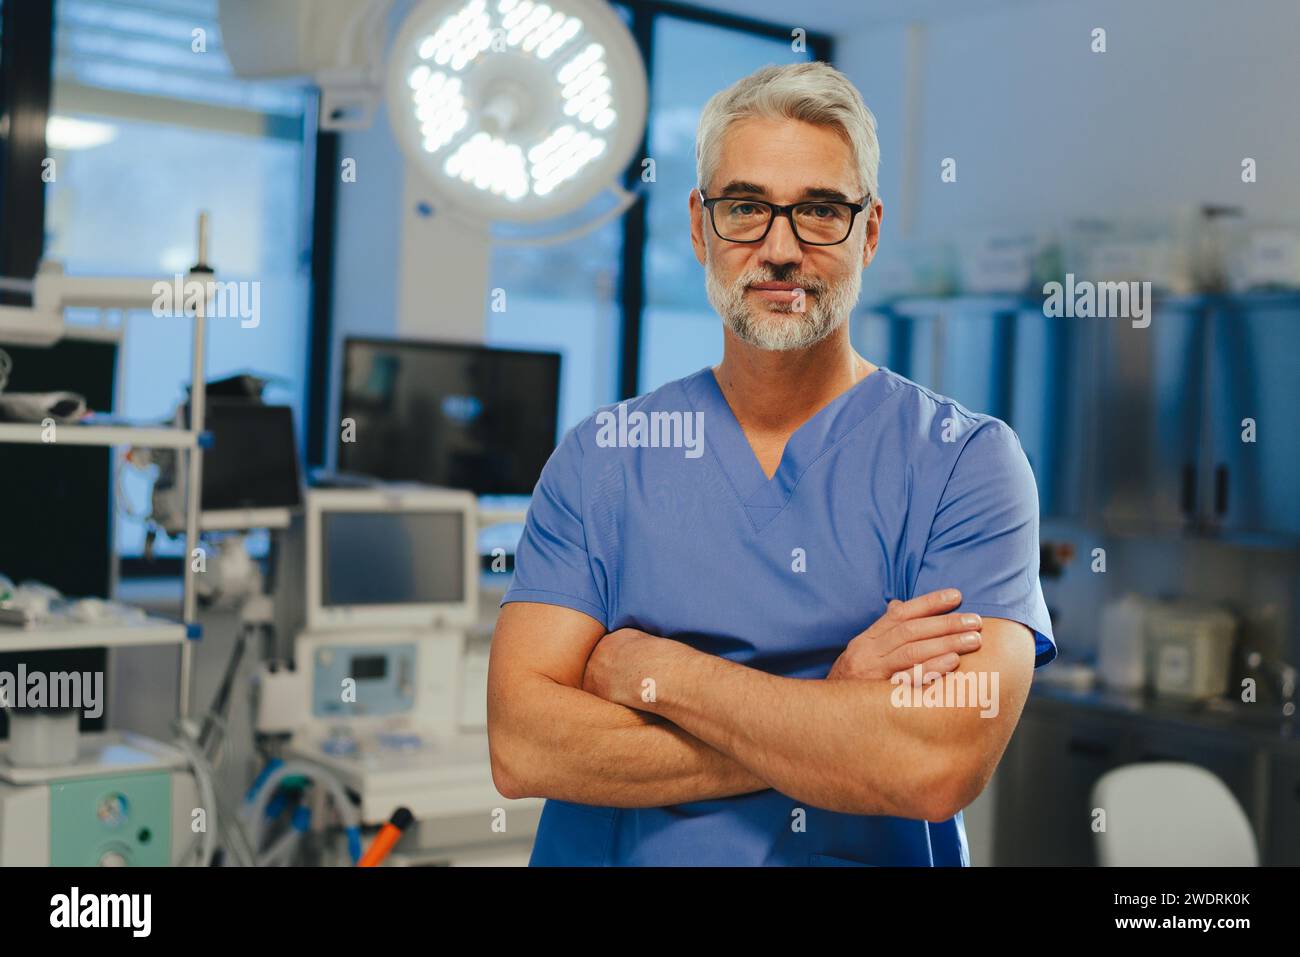 Portrait of confident ER doctor standing in hospital emergency room. Handsome doctor in scrubs holding clipboard, standing in modern private clinic. Stock Photo